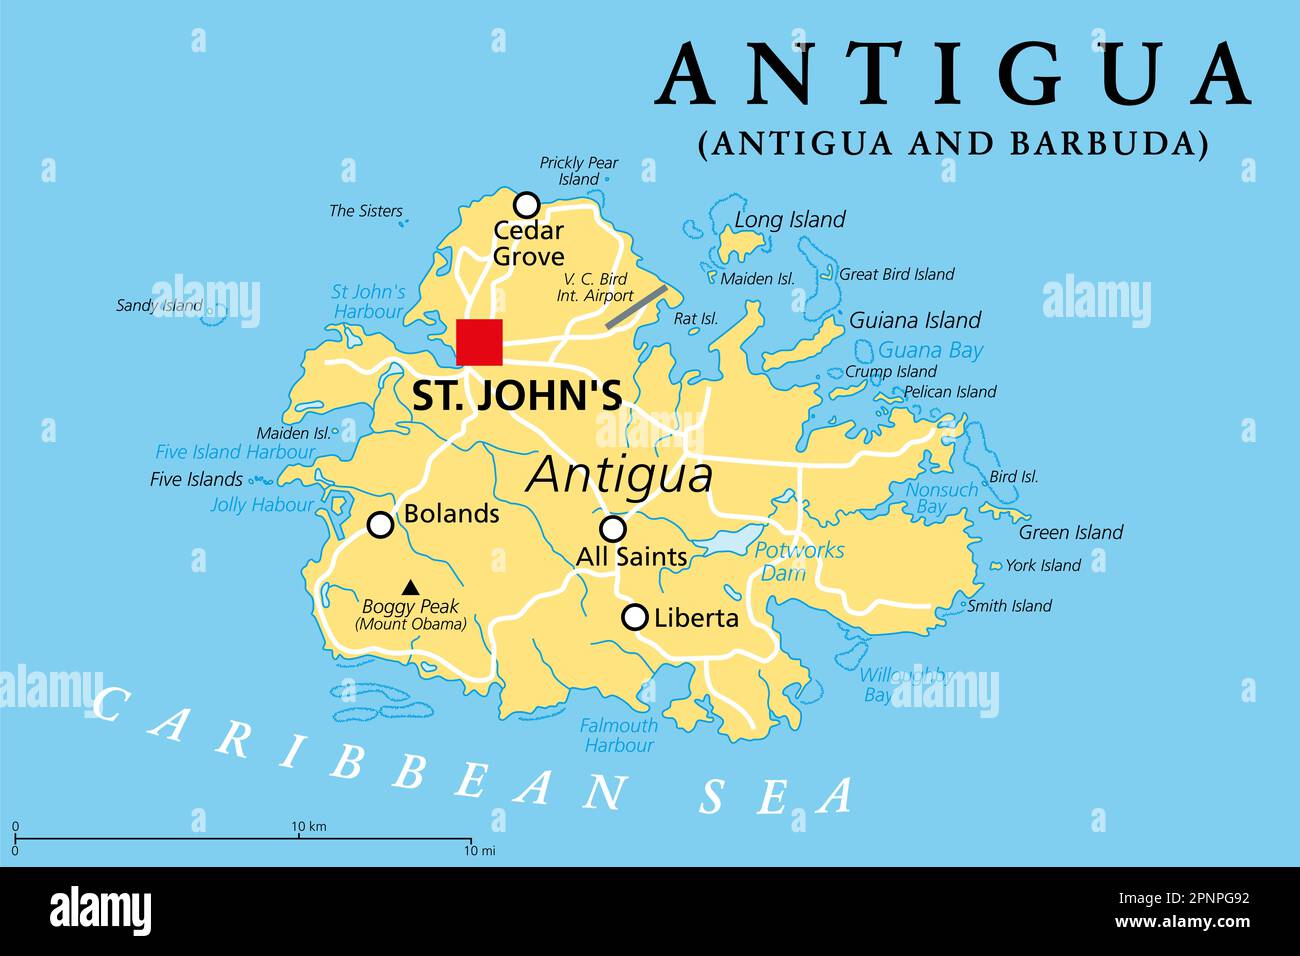 Antigua, island in the Lesser Antilles, political map. One of the Leeward Islands in the Caribbean region, and the most populous island of the country. Stock Photo